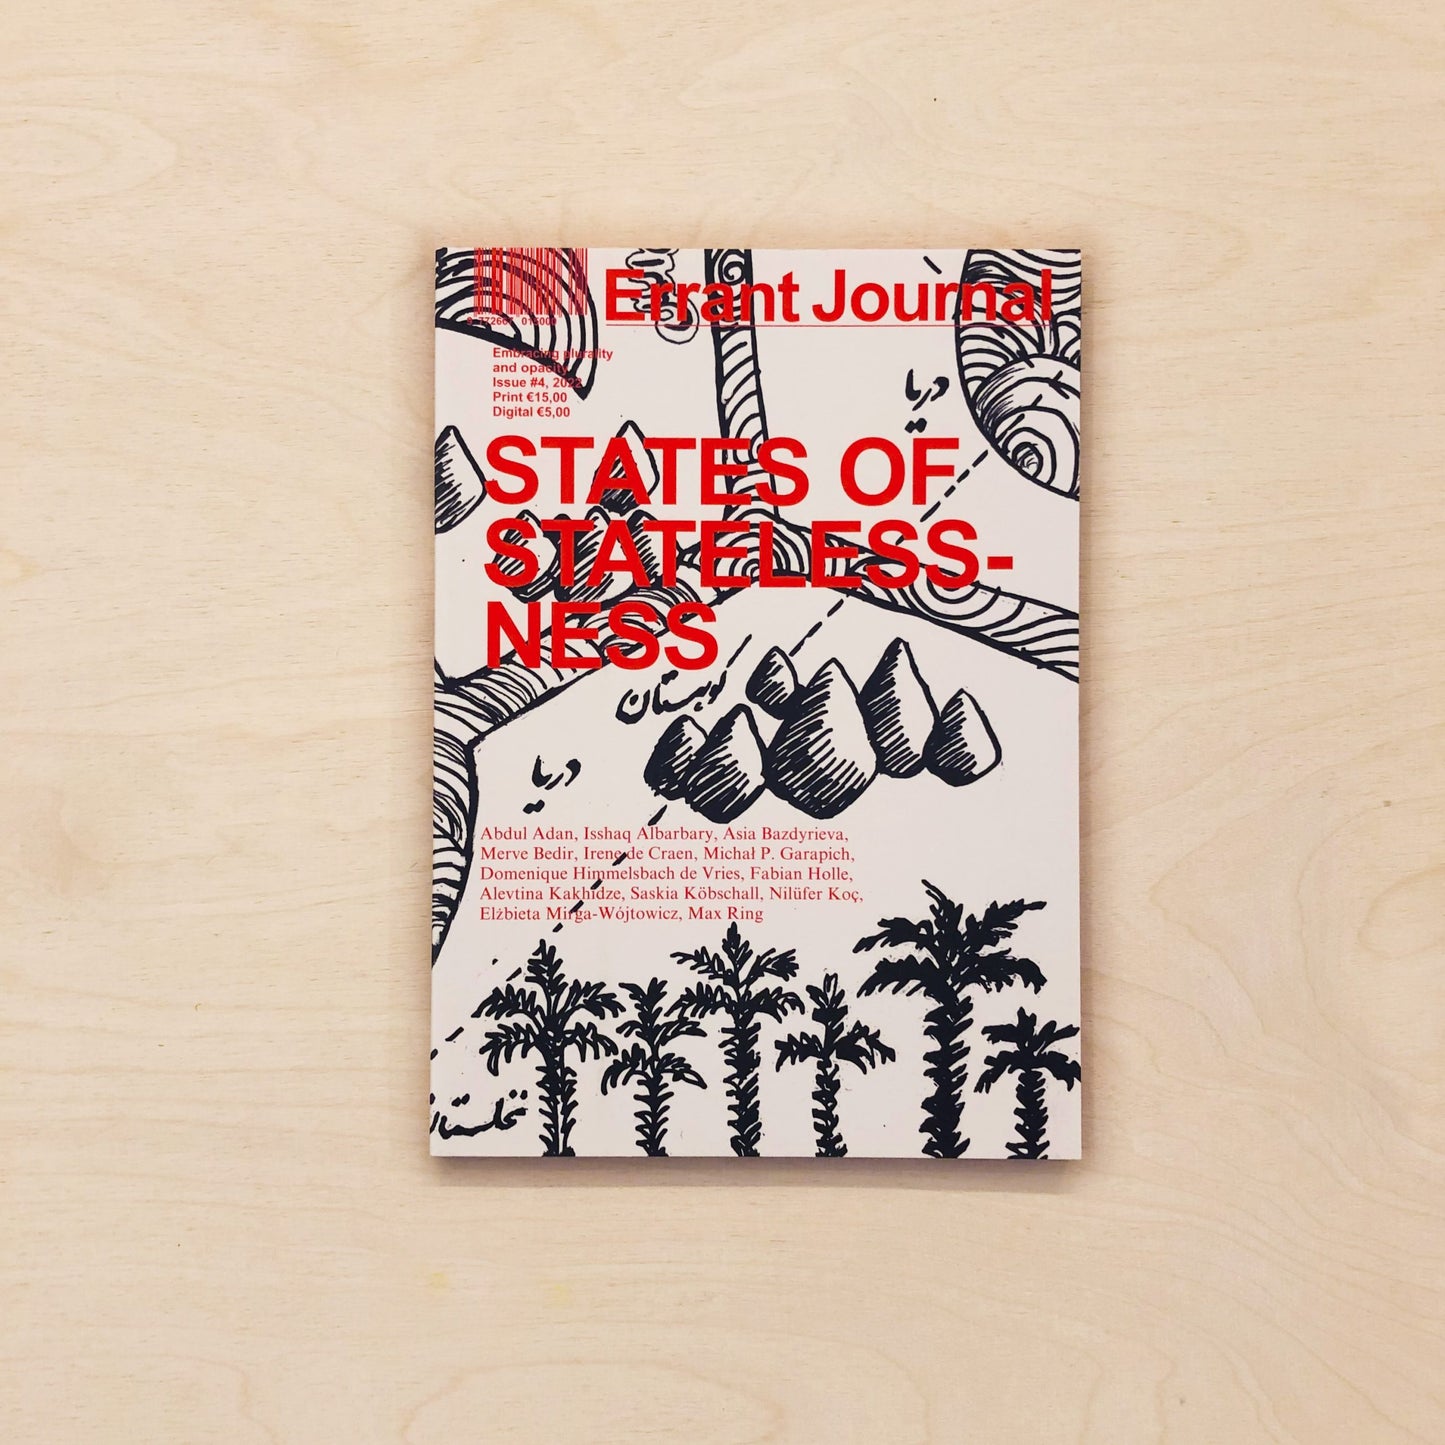 Errant Journal - States of Statelessness - Issue #4